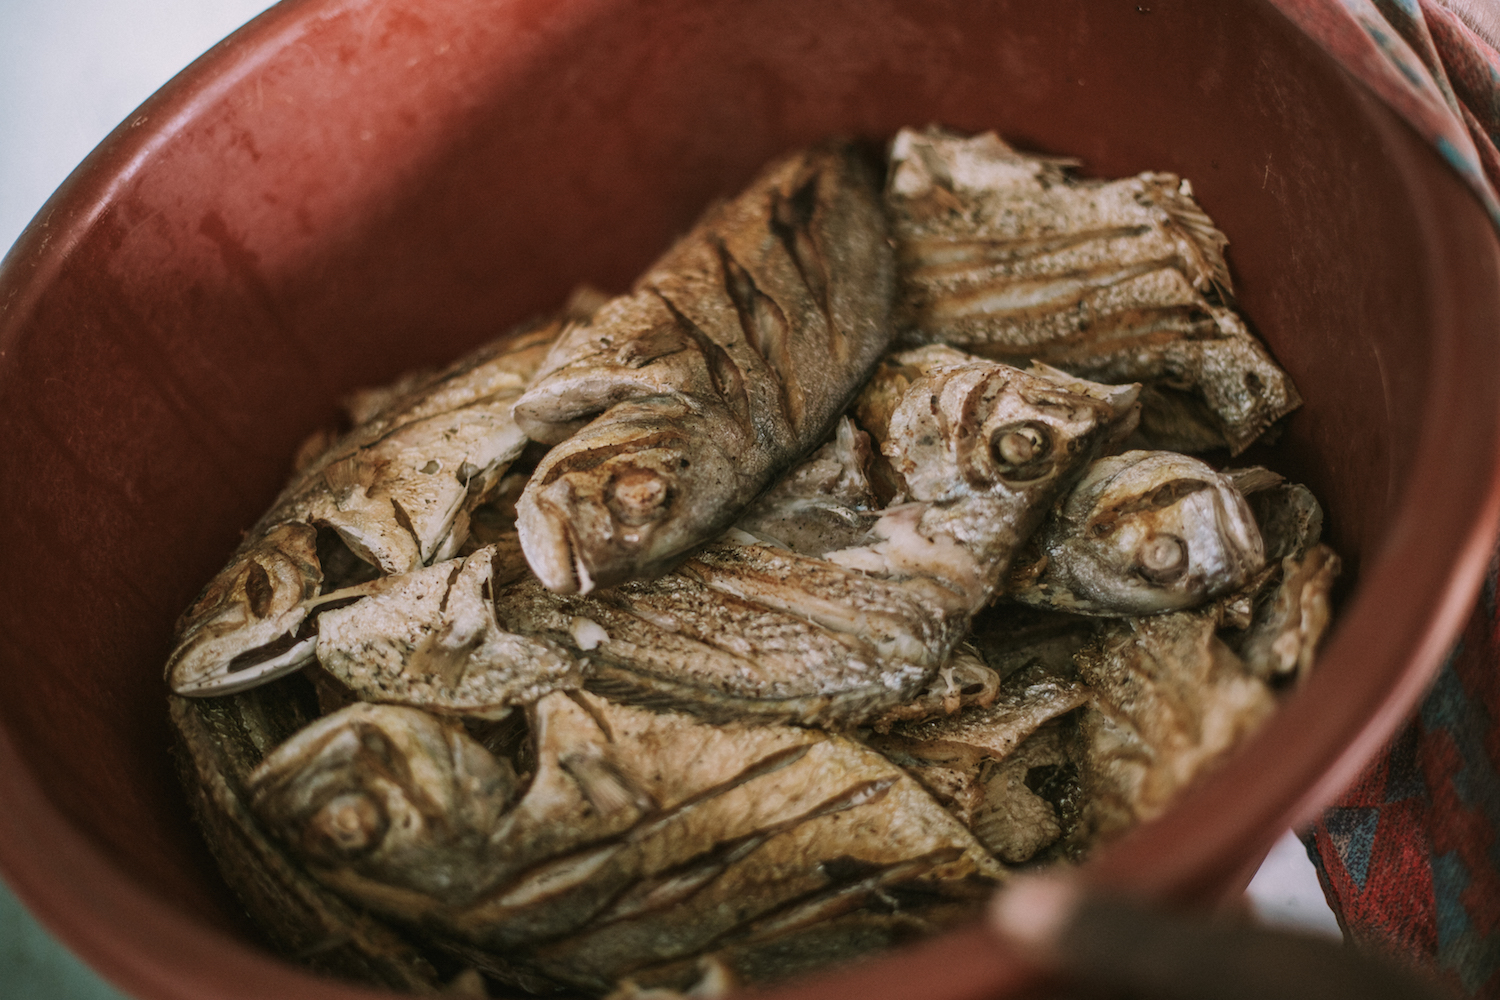  A common traditional creole meal is fish prepared like this and served with rice and plantains. 